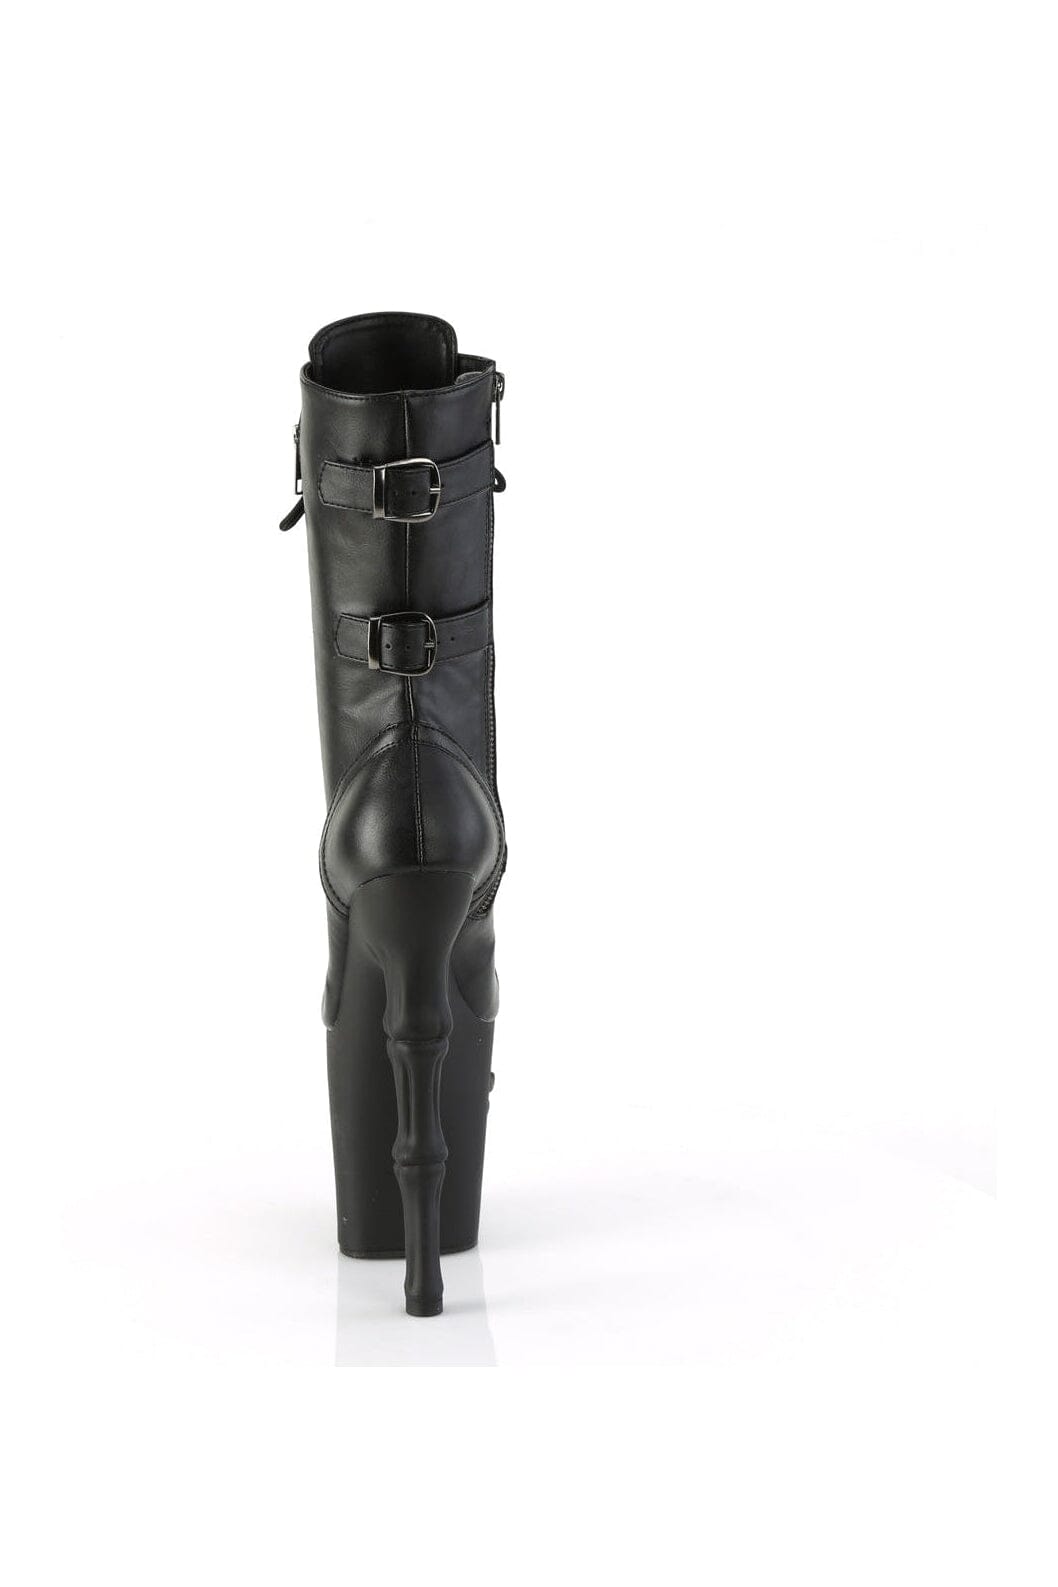 RAPTURE-1047 Black Faux Leather Knee Boot-Knee Boots-Pleaser-SEXYSHOES.COM